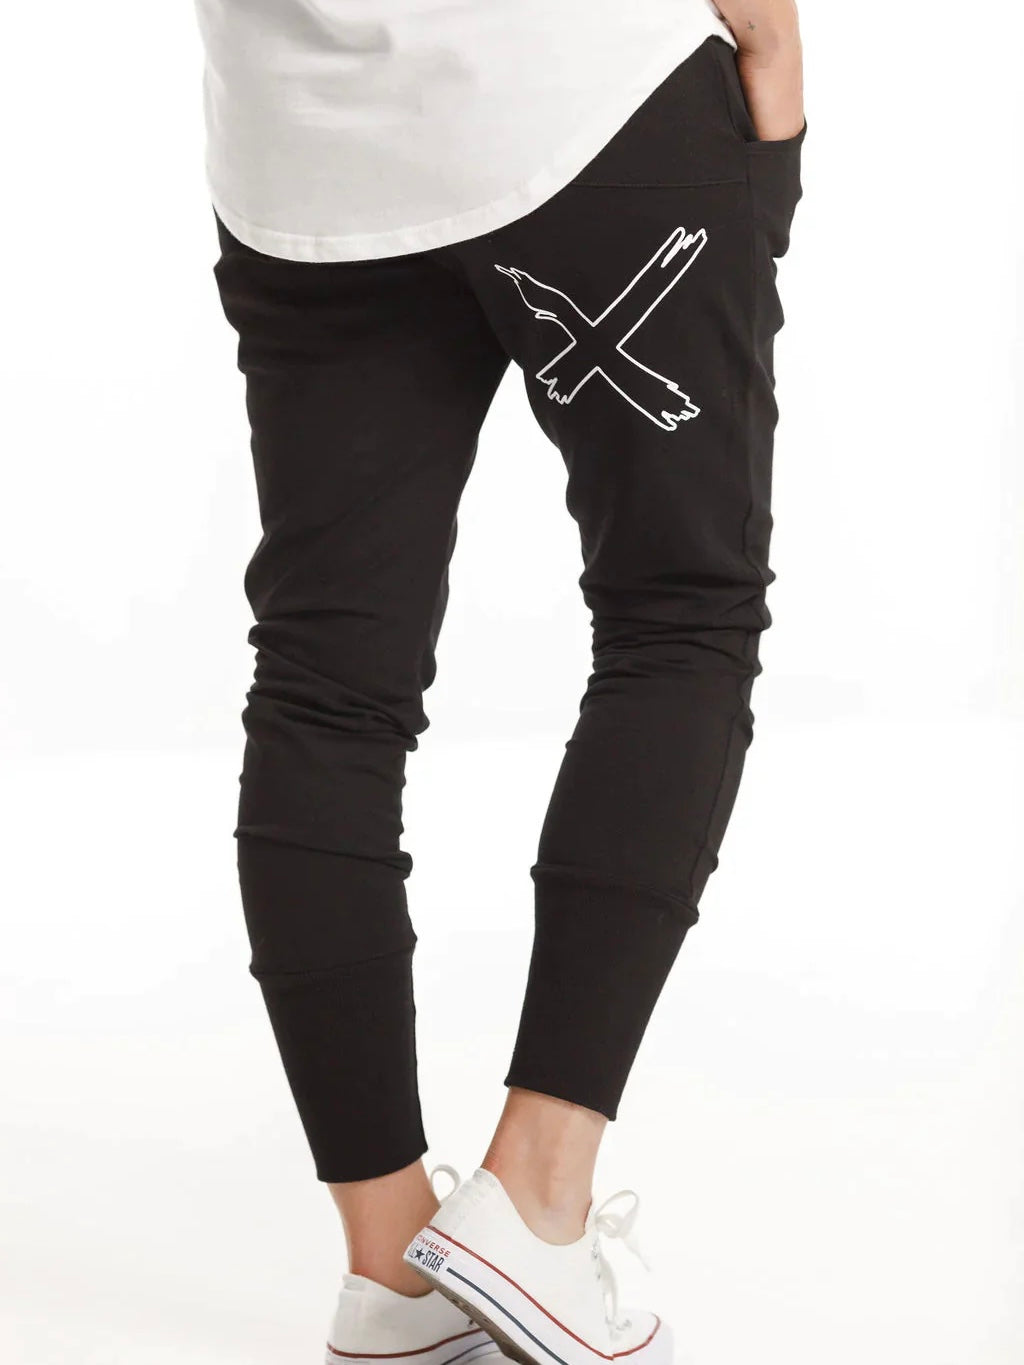 Home Lee Apartment Pants-Winter Weight-Black with white X outline